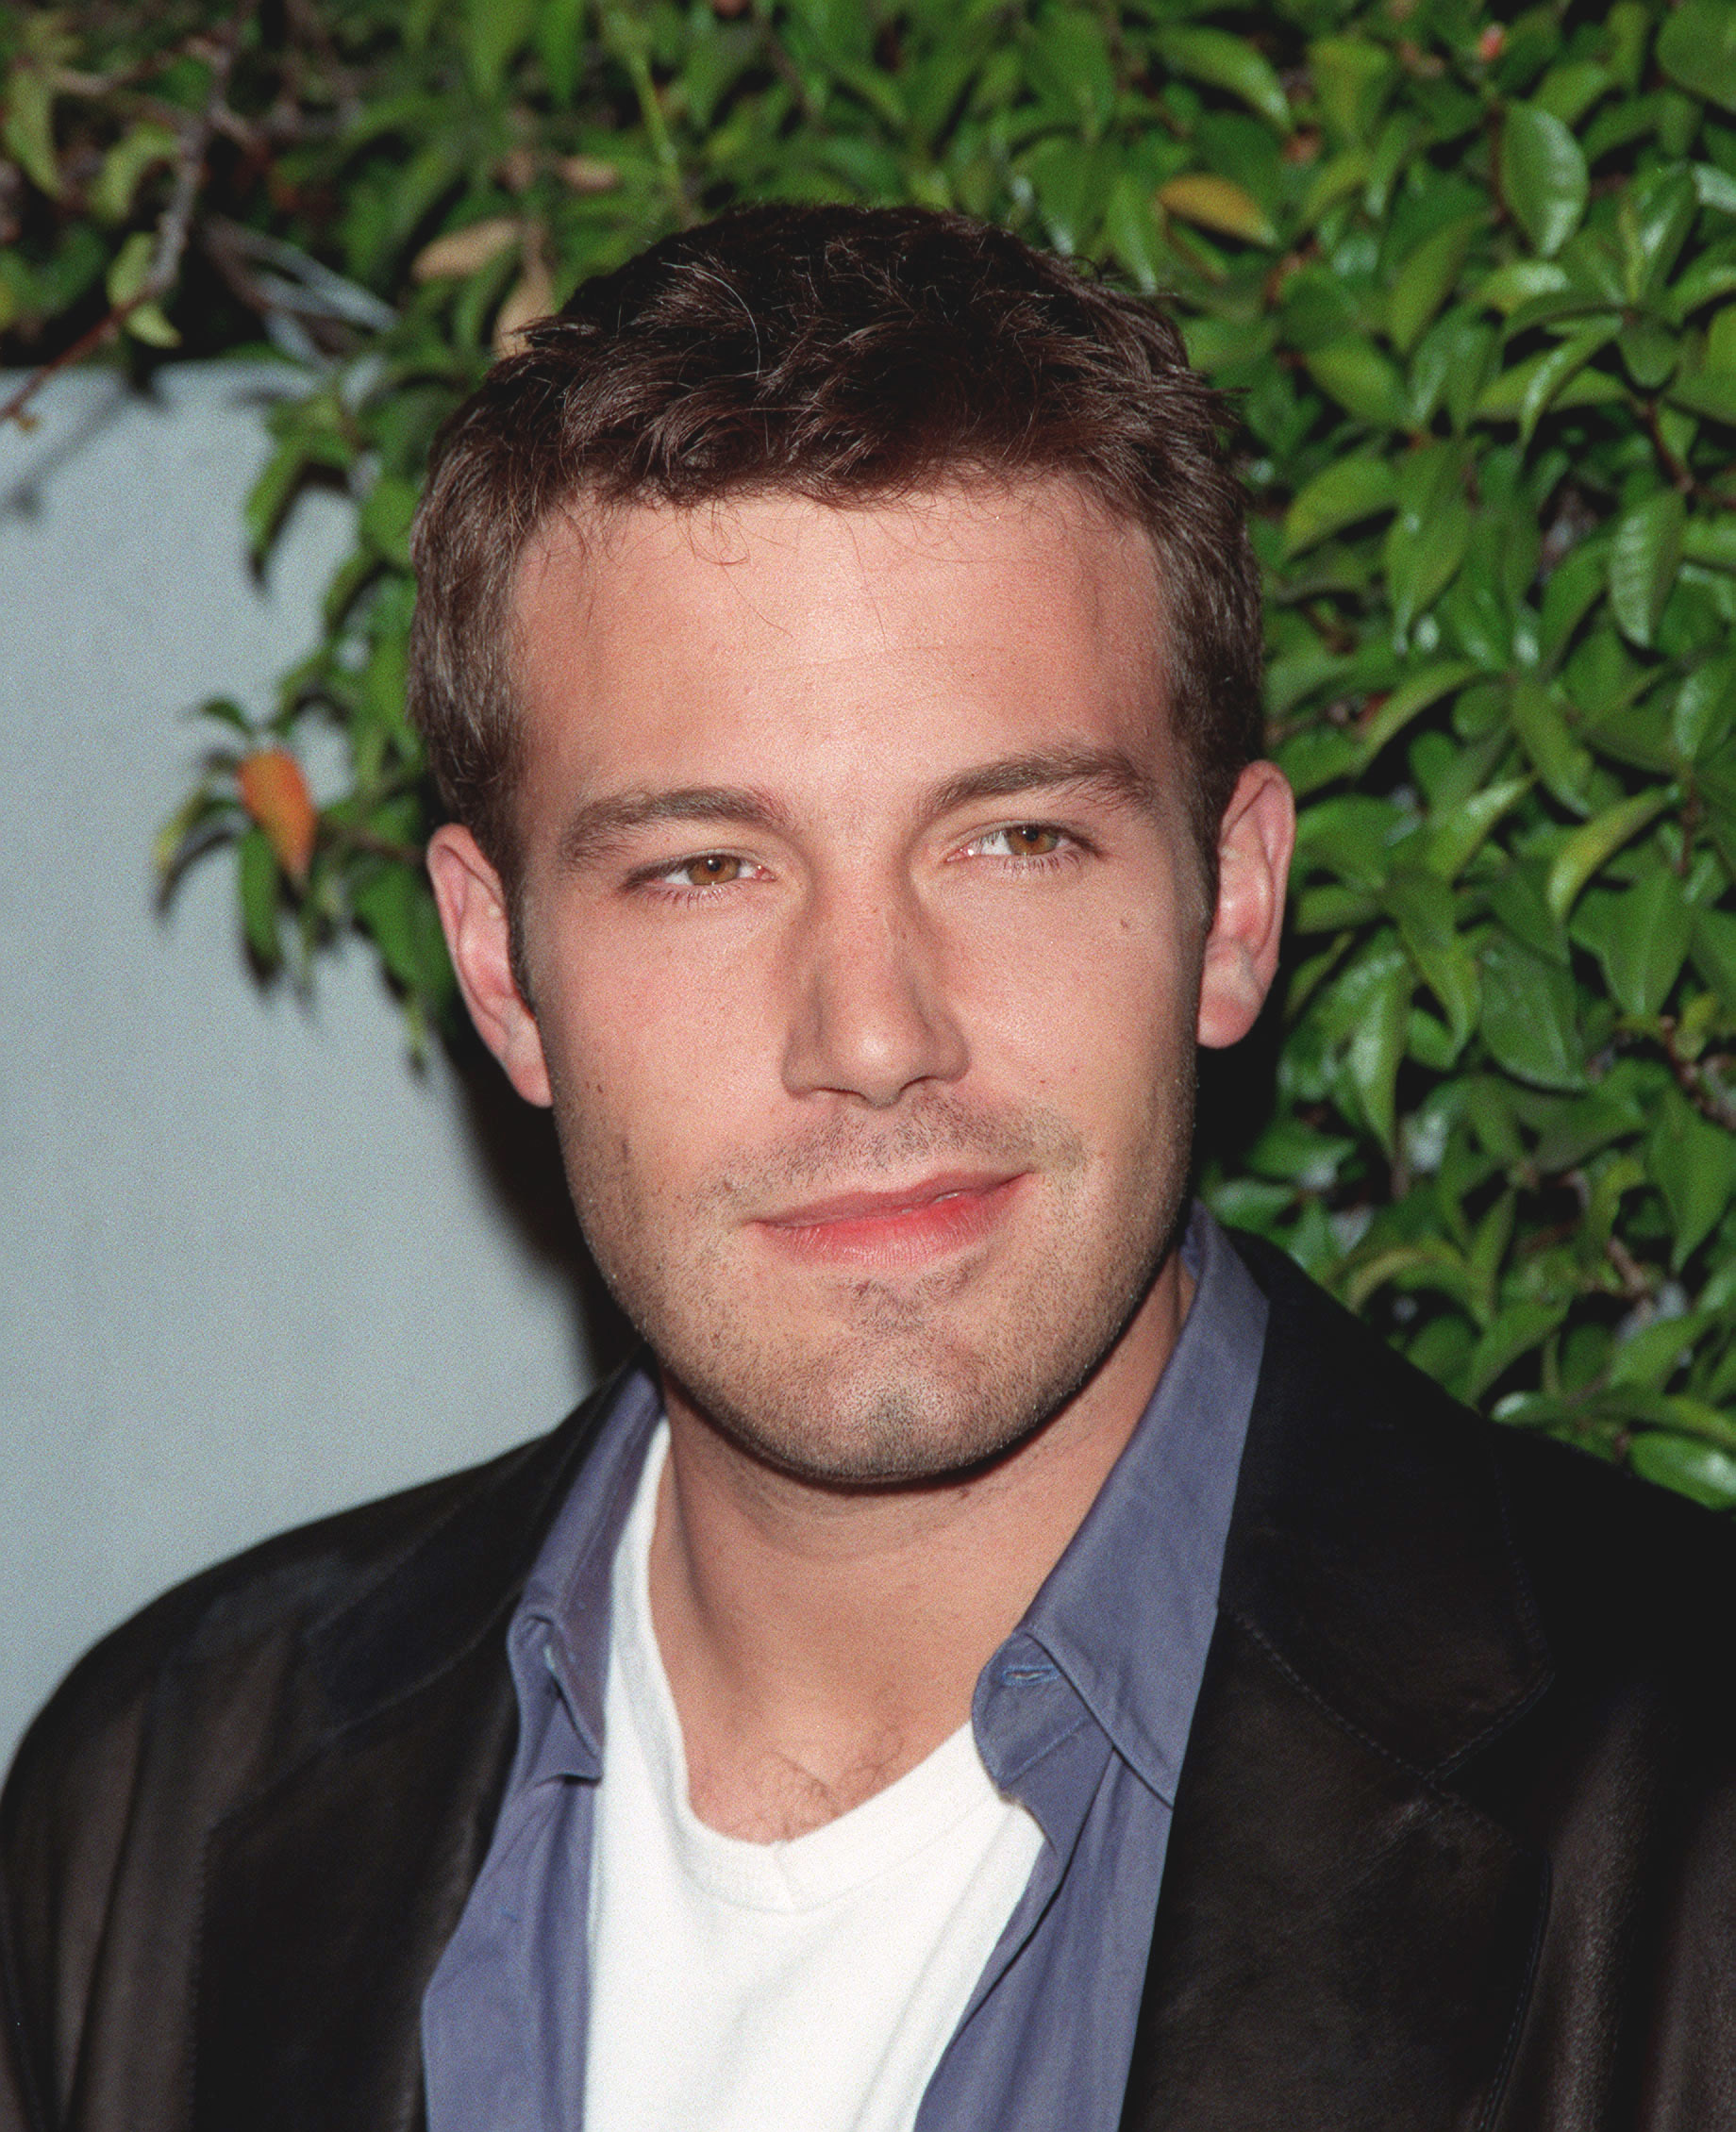 Ben Affleck at the "Dogma" LA Premiere in Los Angeles, California on November 9, 1999 | Source: Getty Images